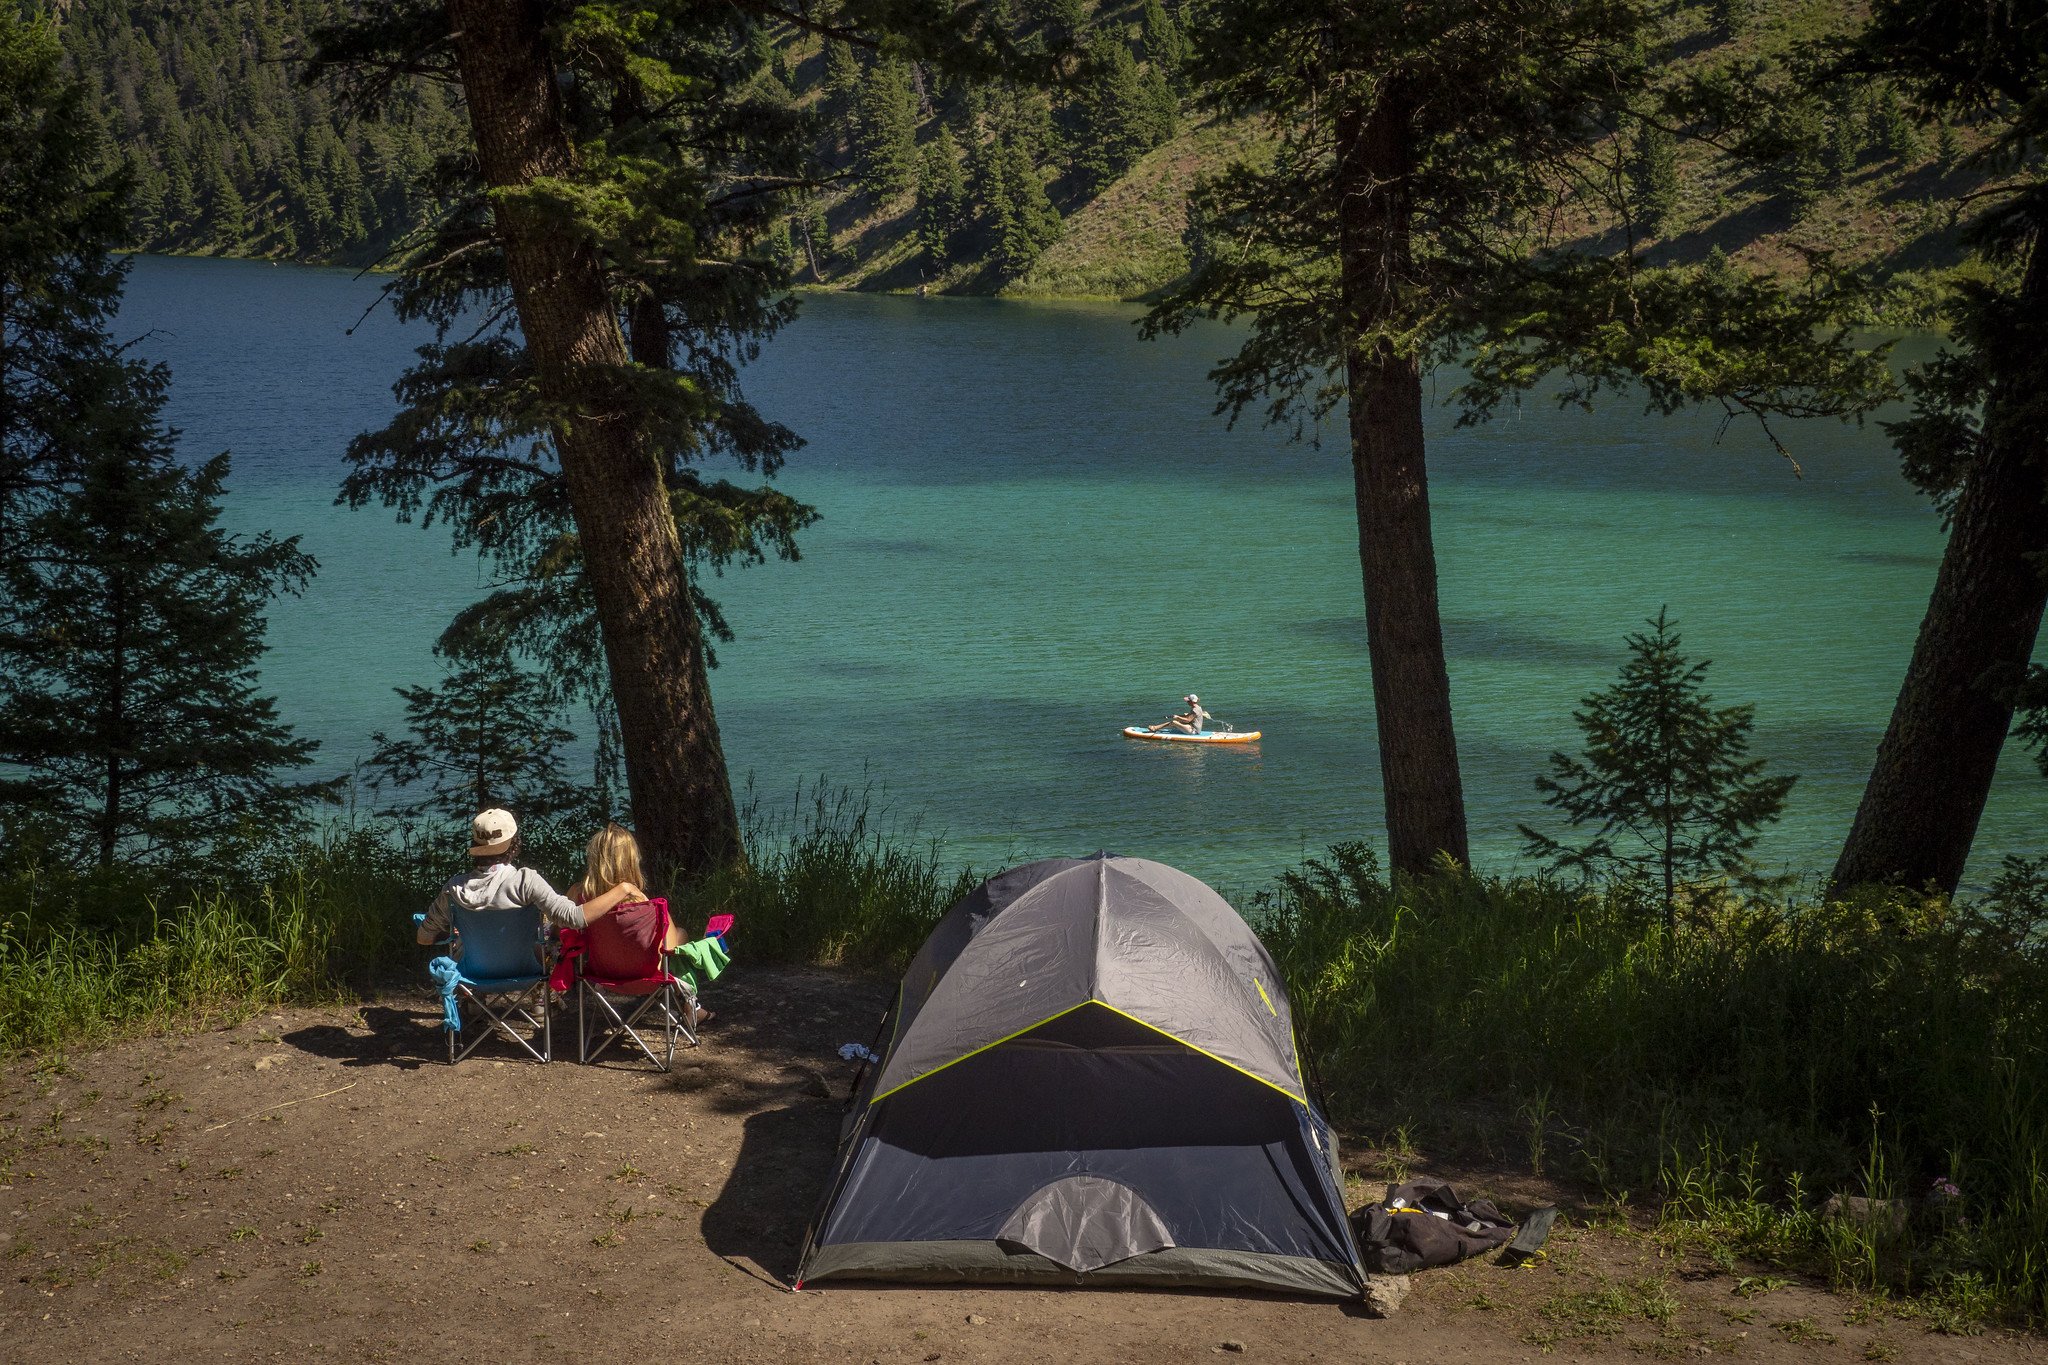 Two people sit by a tent at a forested lake.